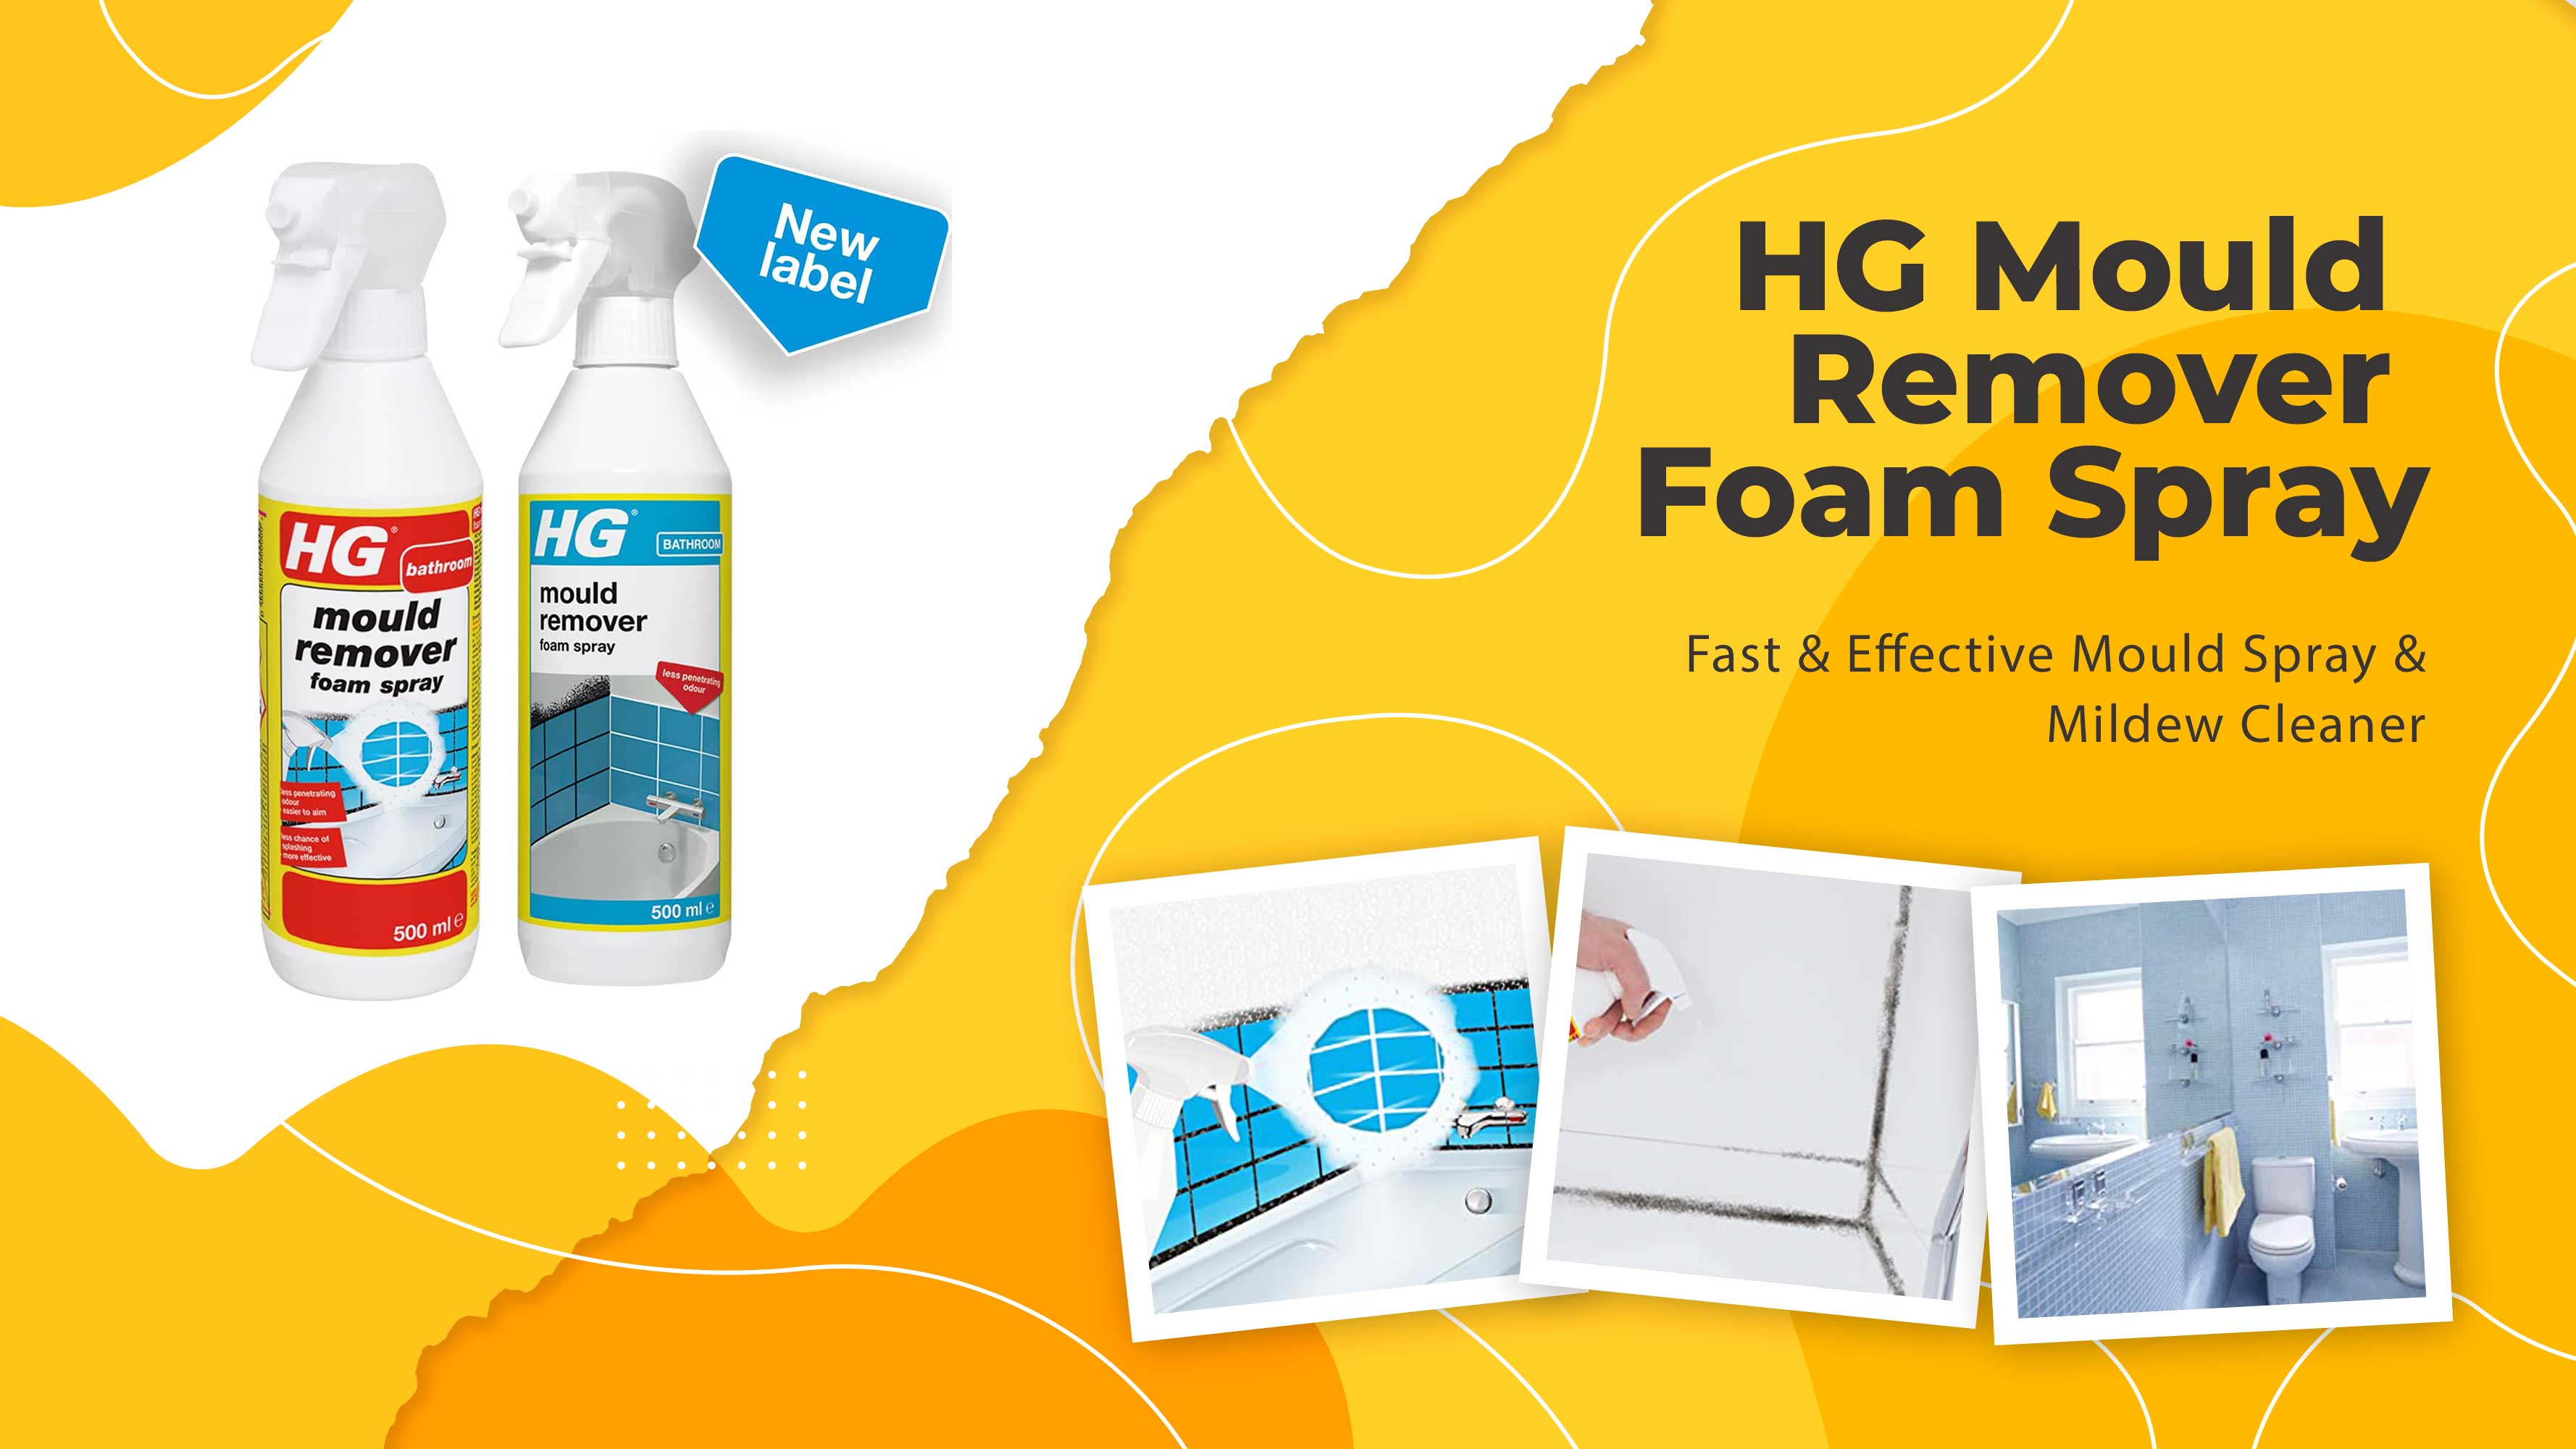 HG-Mould-Remover-Foam-Spray-Fast-%26-Effective-Mould-Spray-%26-Mildew-Cleaner.jpg?1668017249595